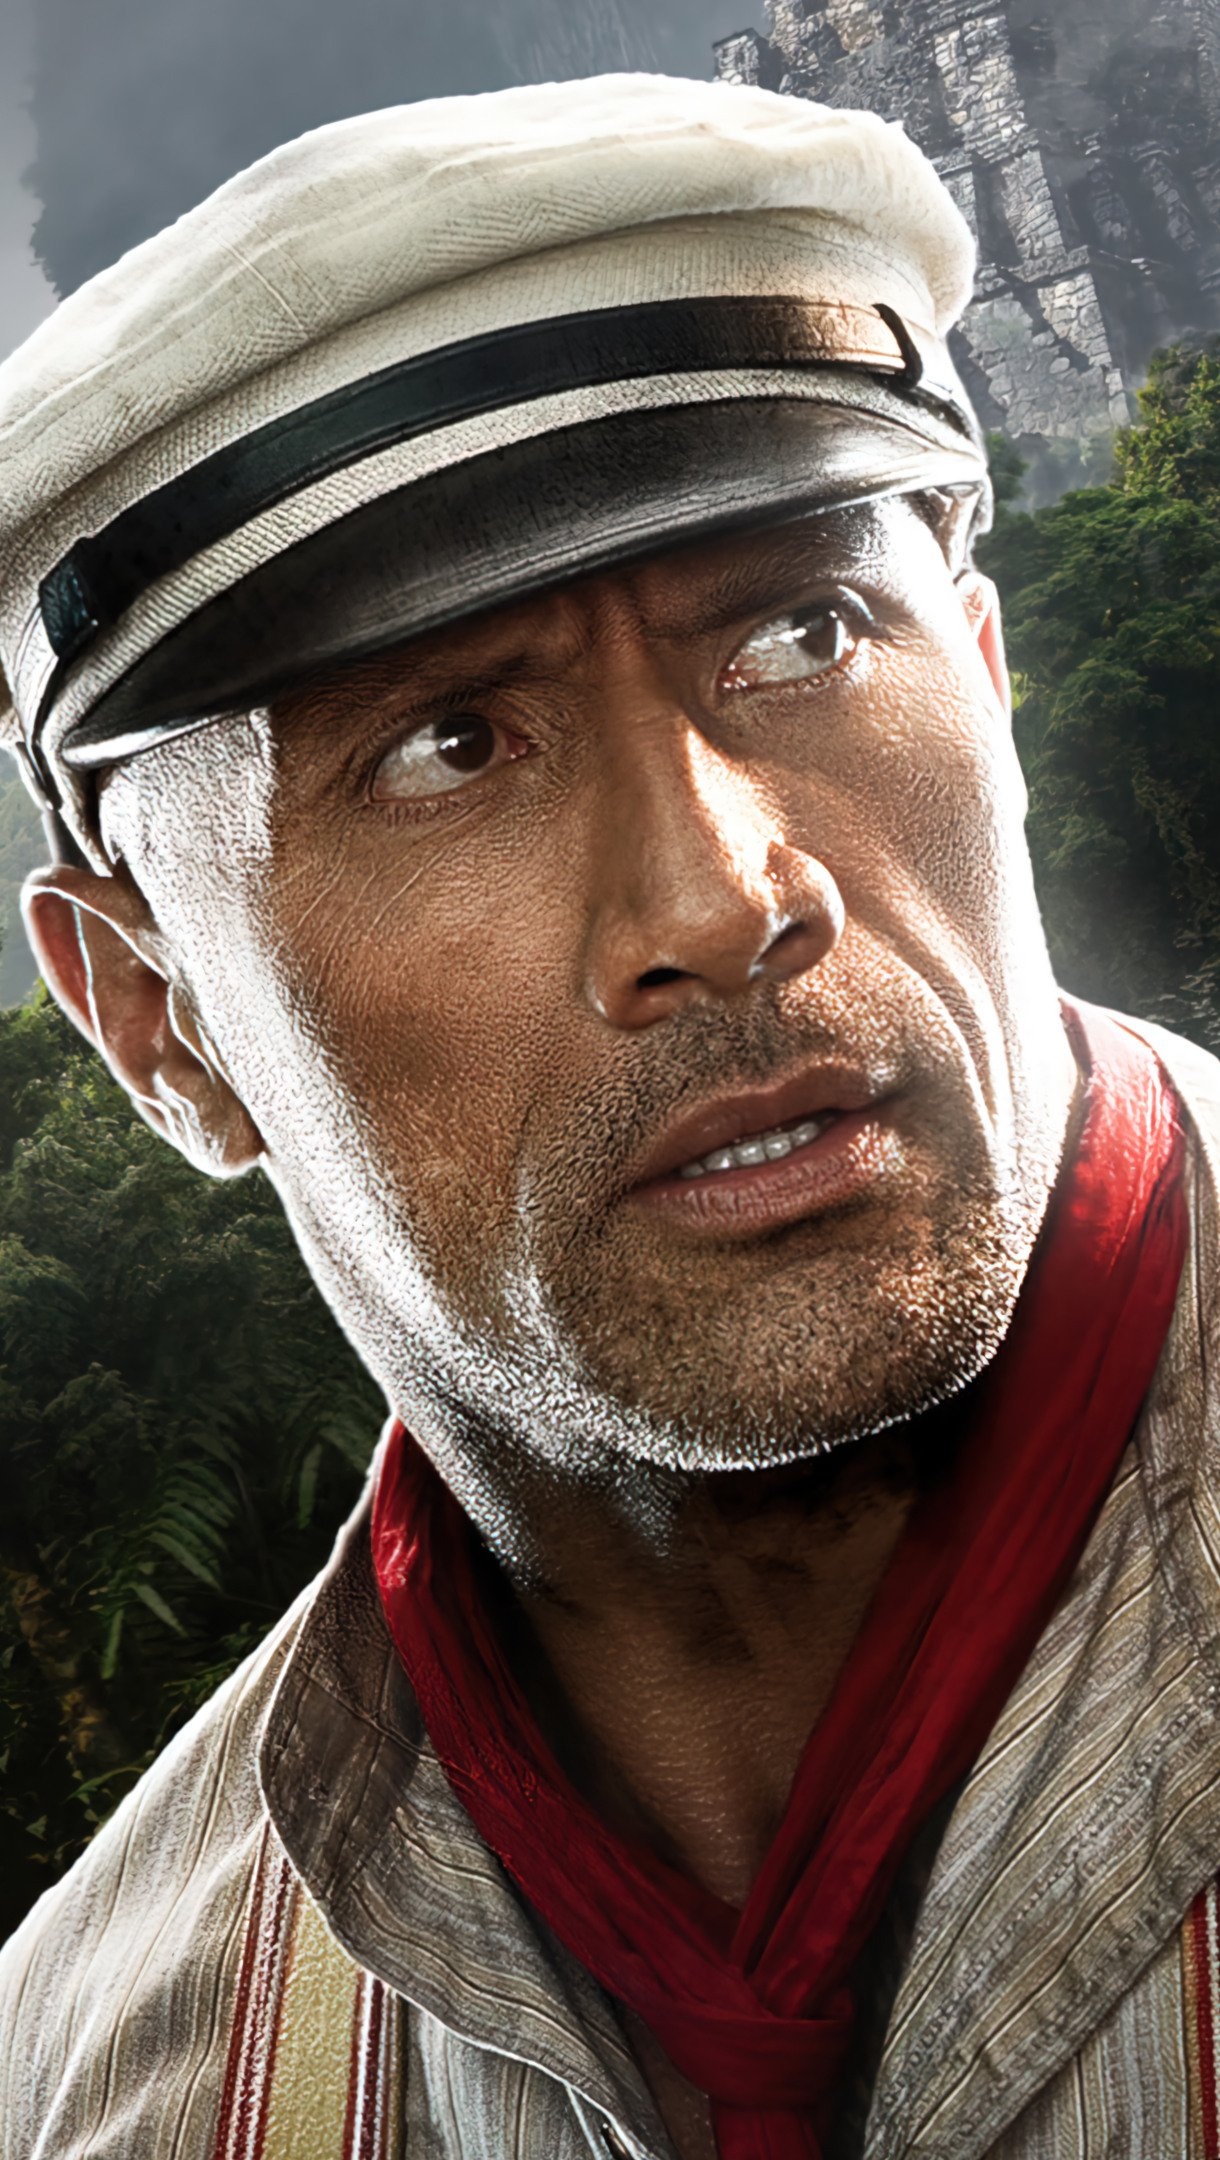 Dwayne Johnson in Jungle Cruise, 4k Ultra HD wallpaper, Action hero, Epic jungle expedition, 1220x2160 HD Phone